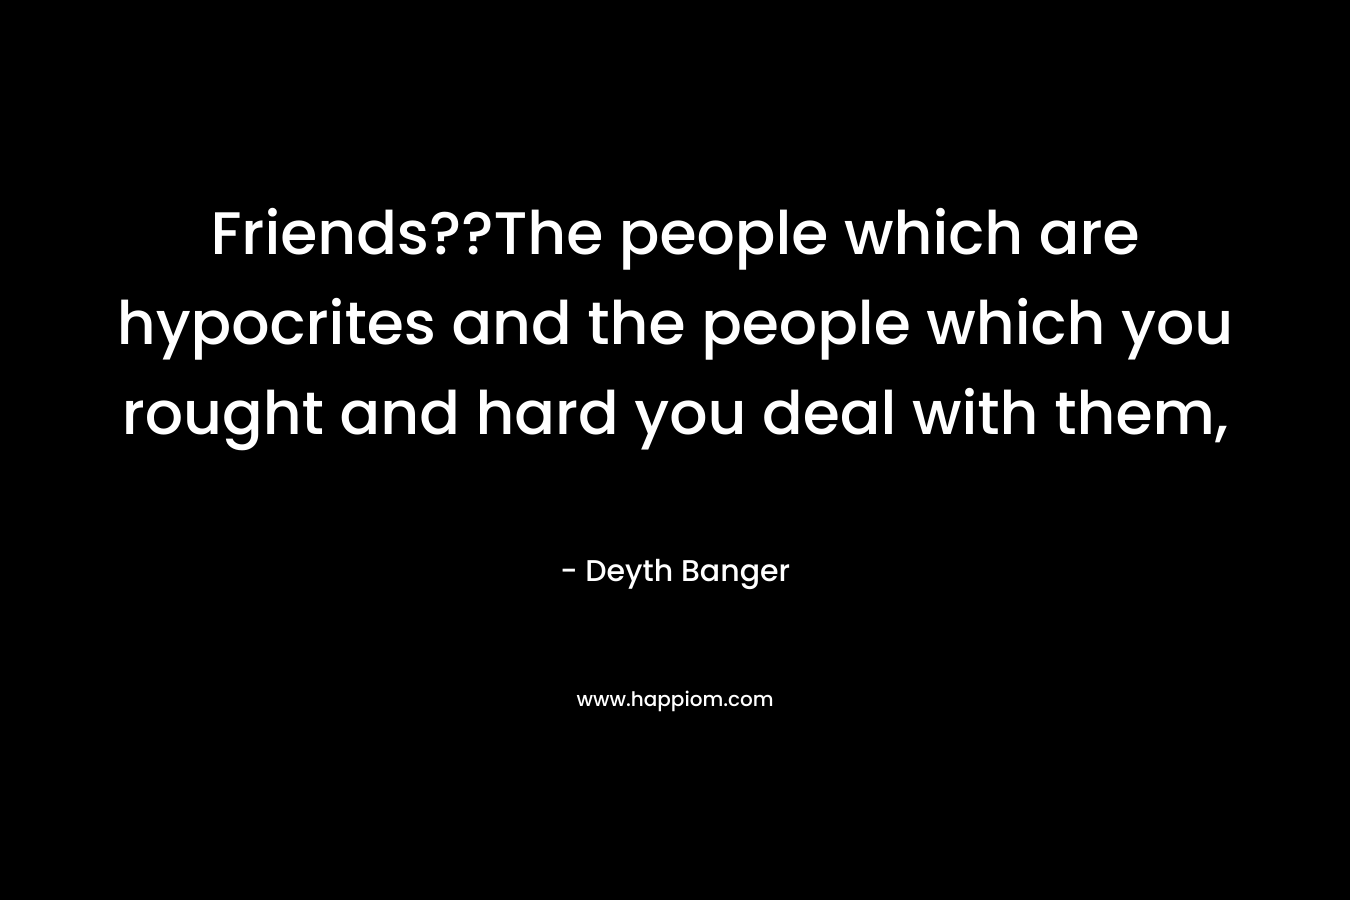 Friends??The people which are hypocrites and the people which you rought and hard you deal with them, – Deyth Banger